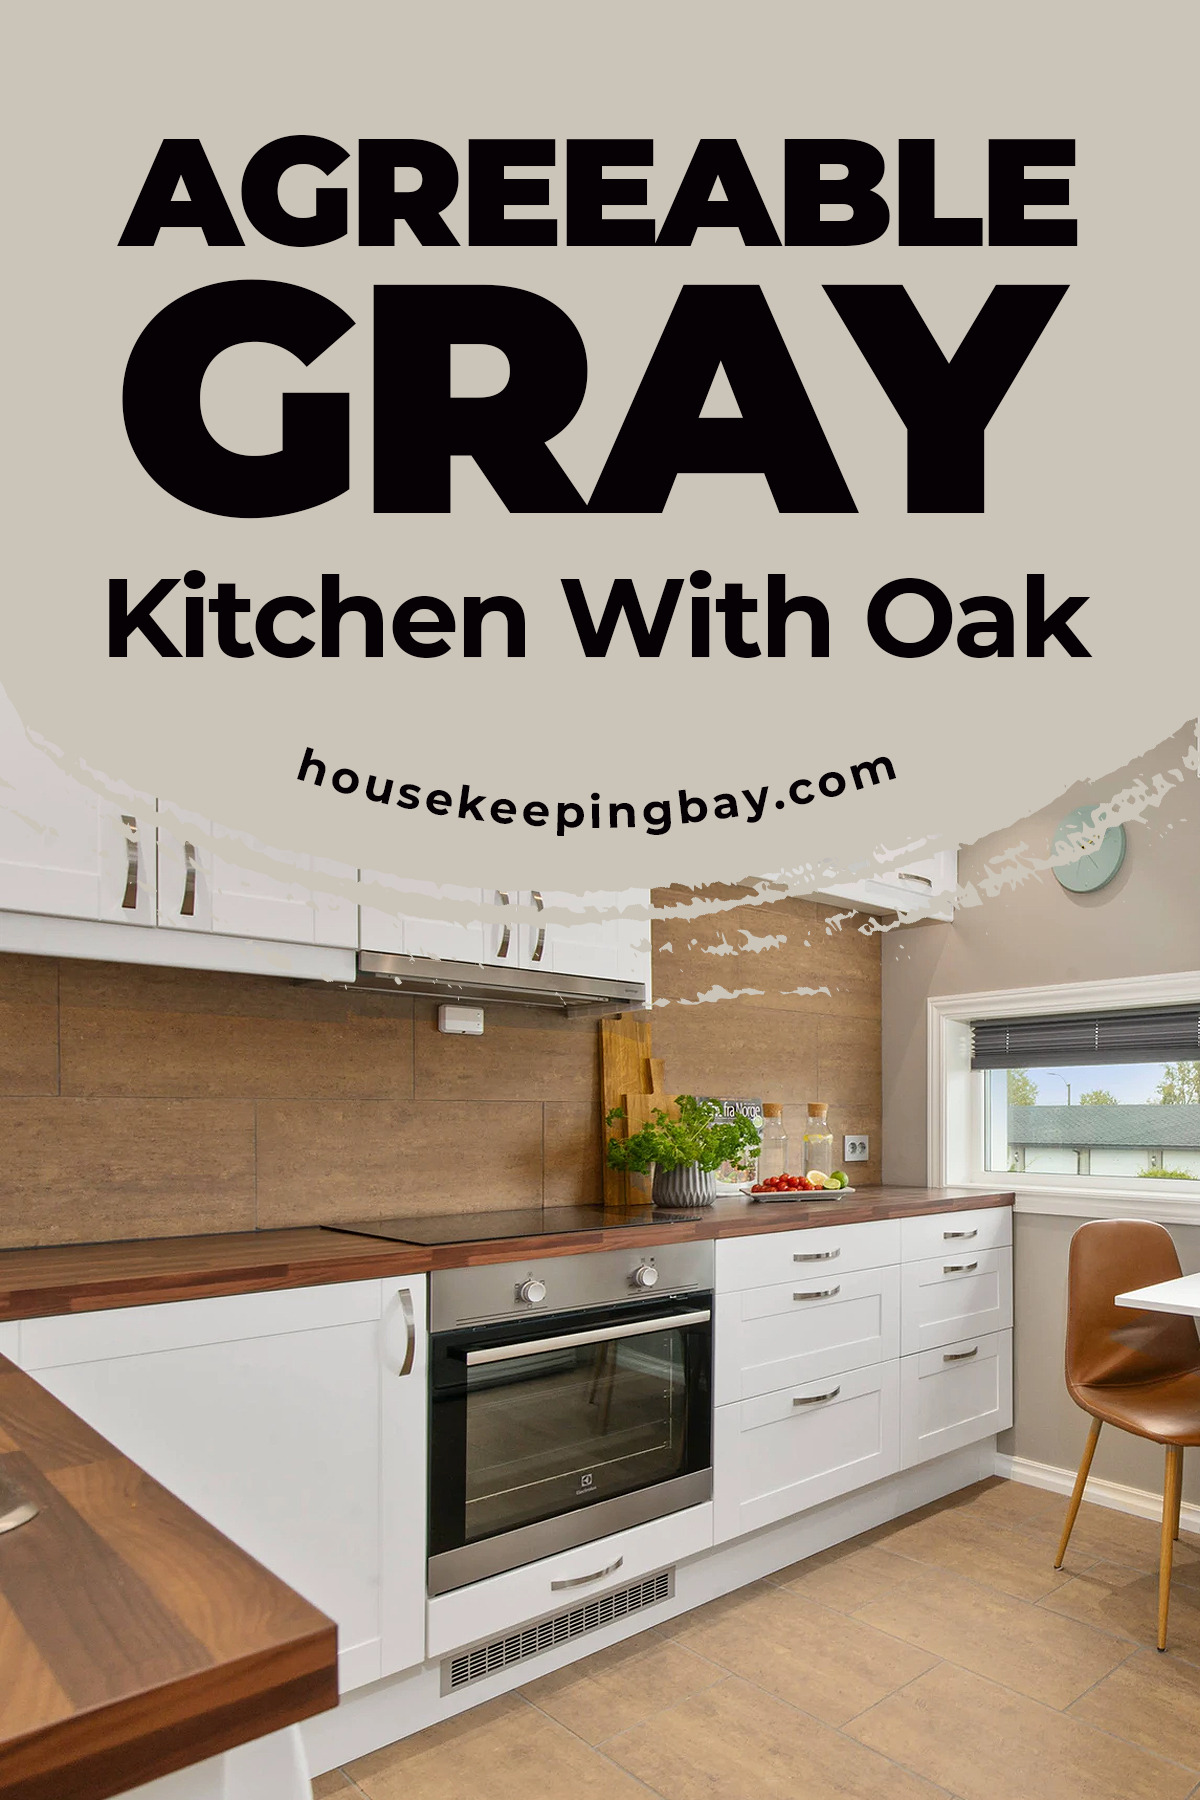 Agreeable gray kitchen with oak